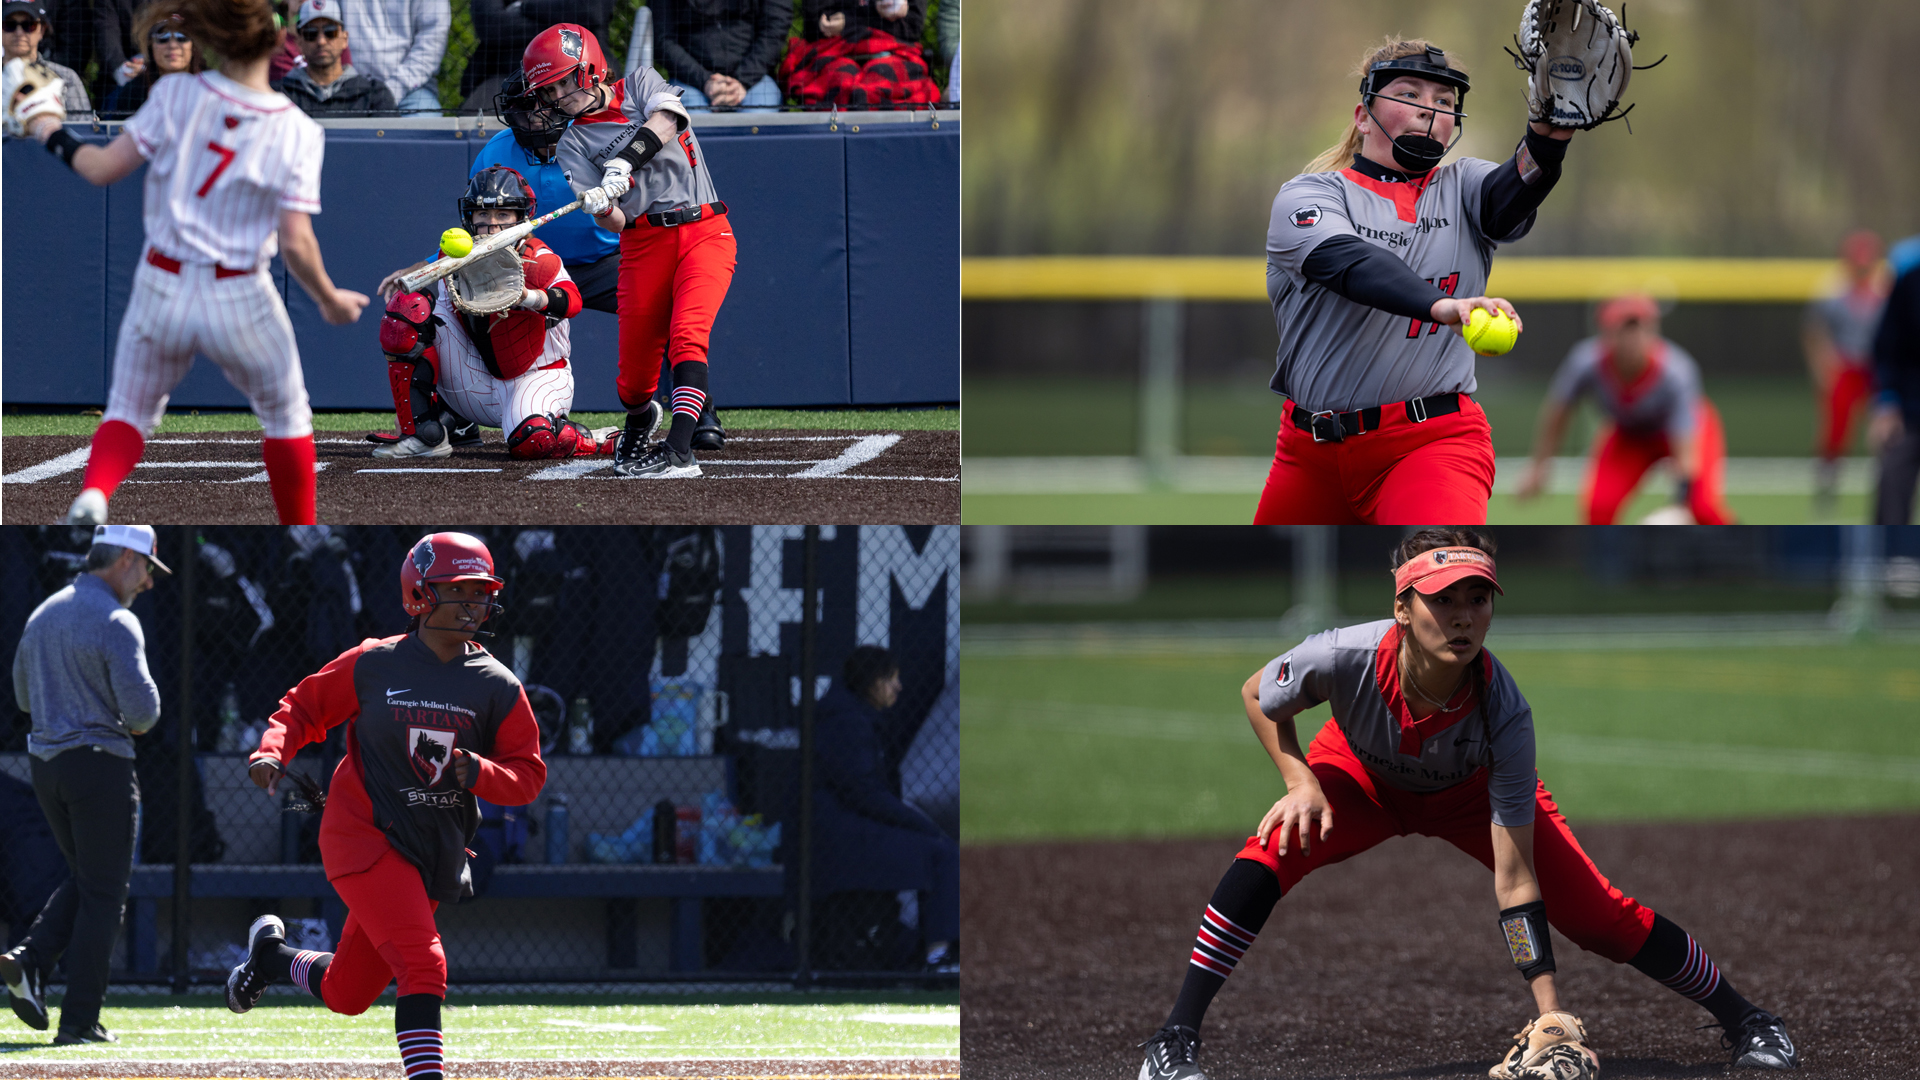 four images of women's softball players batting, pitching, running, and fielding